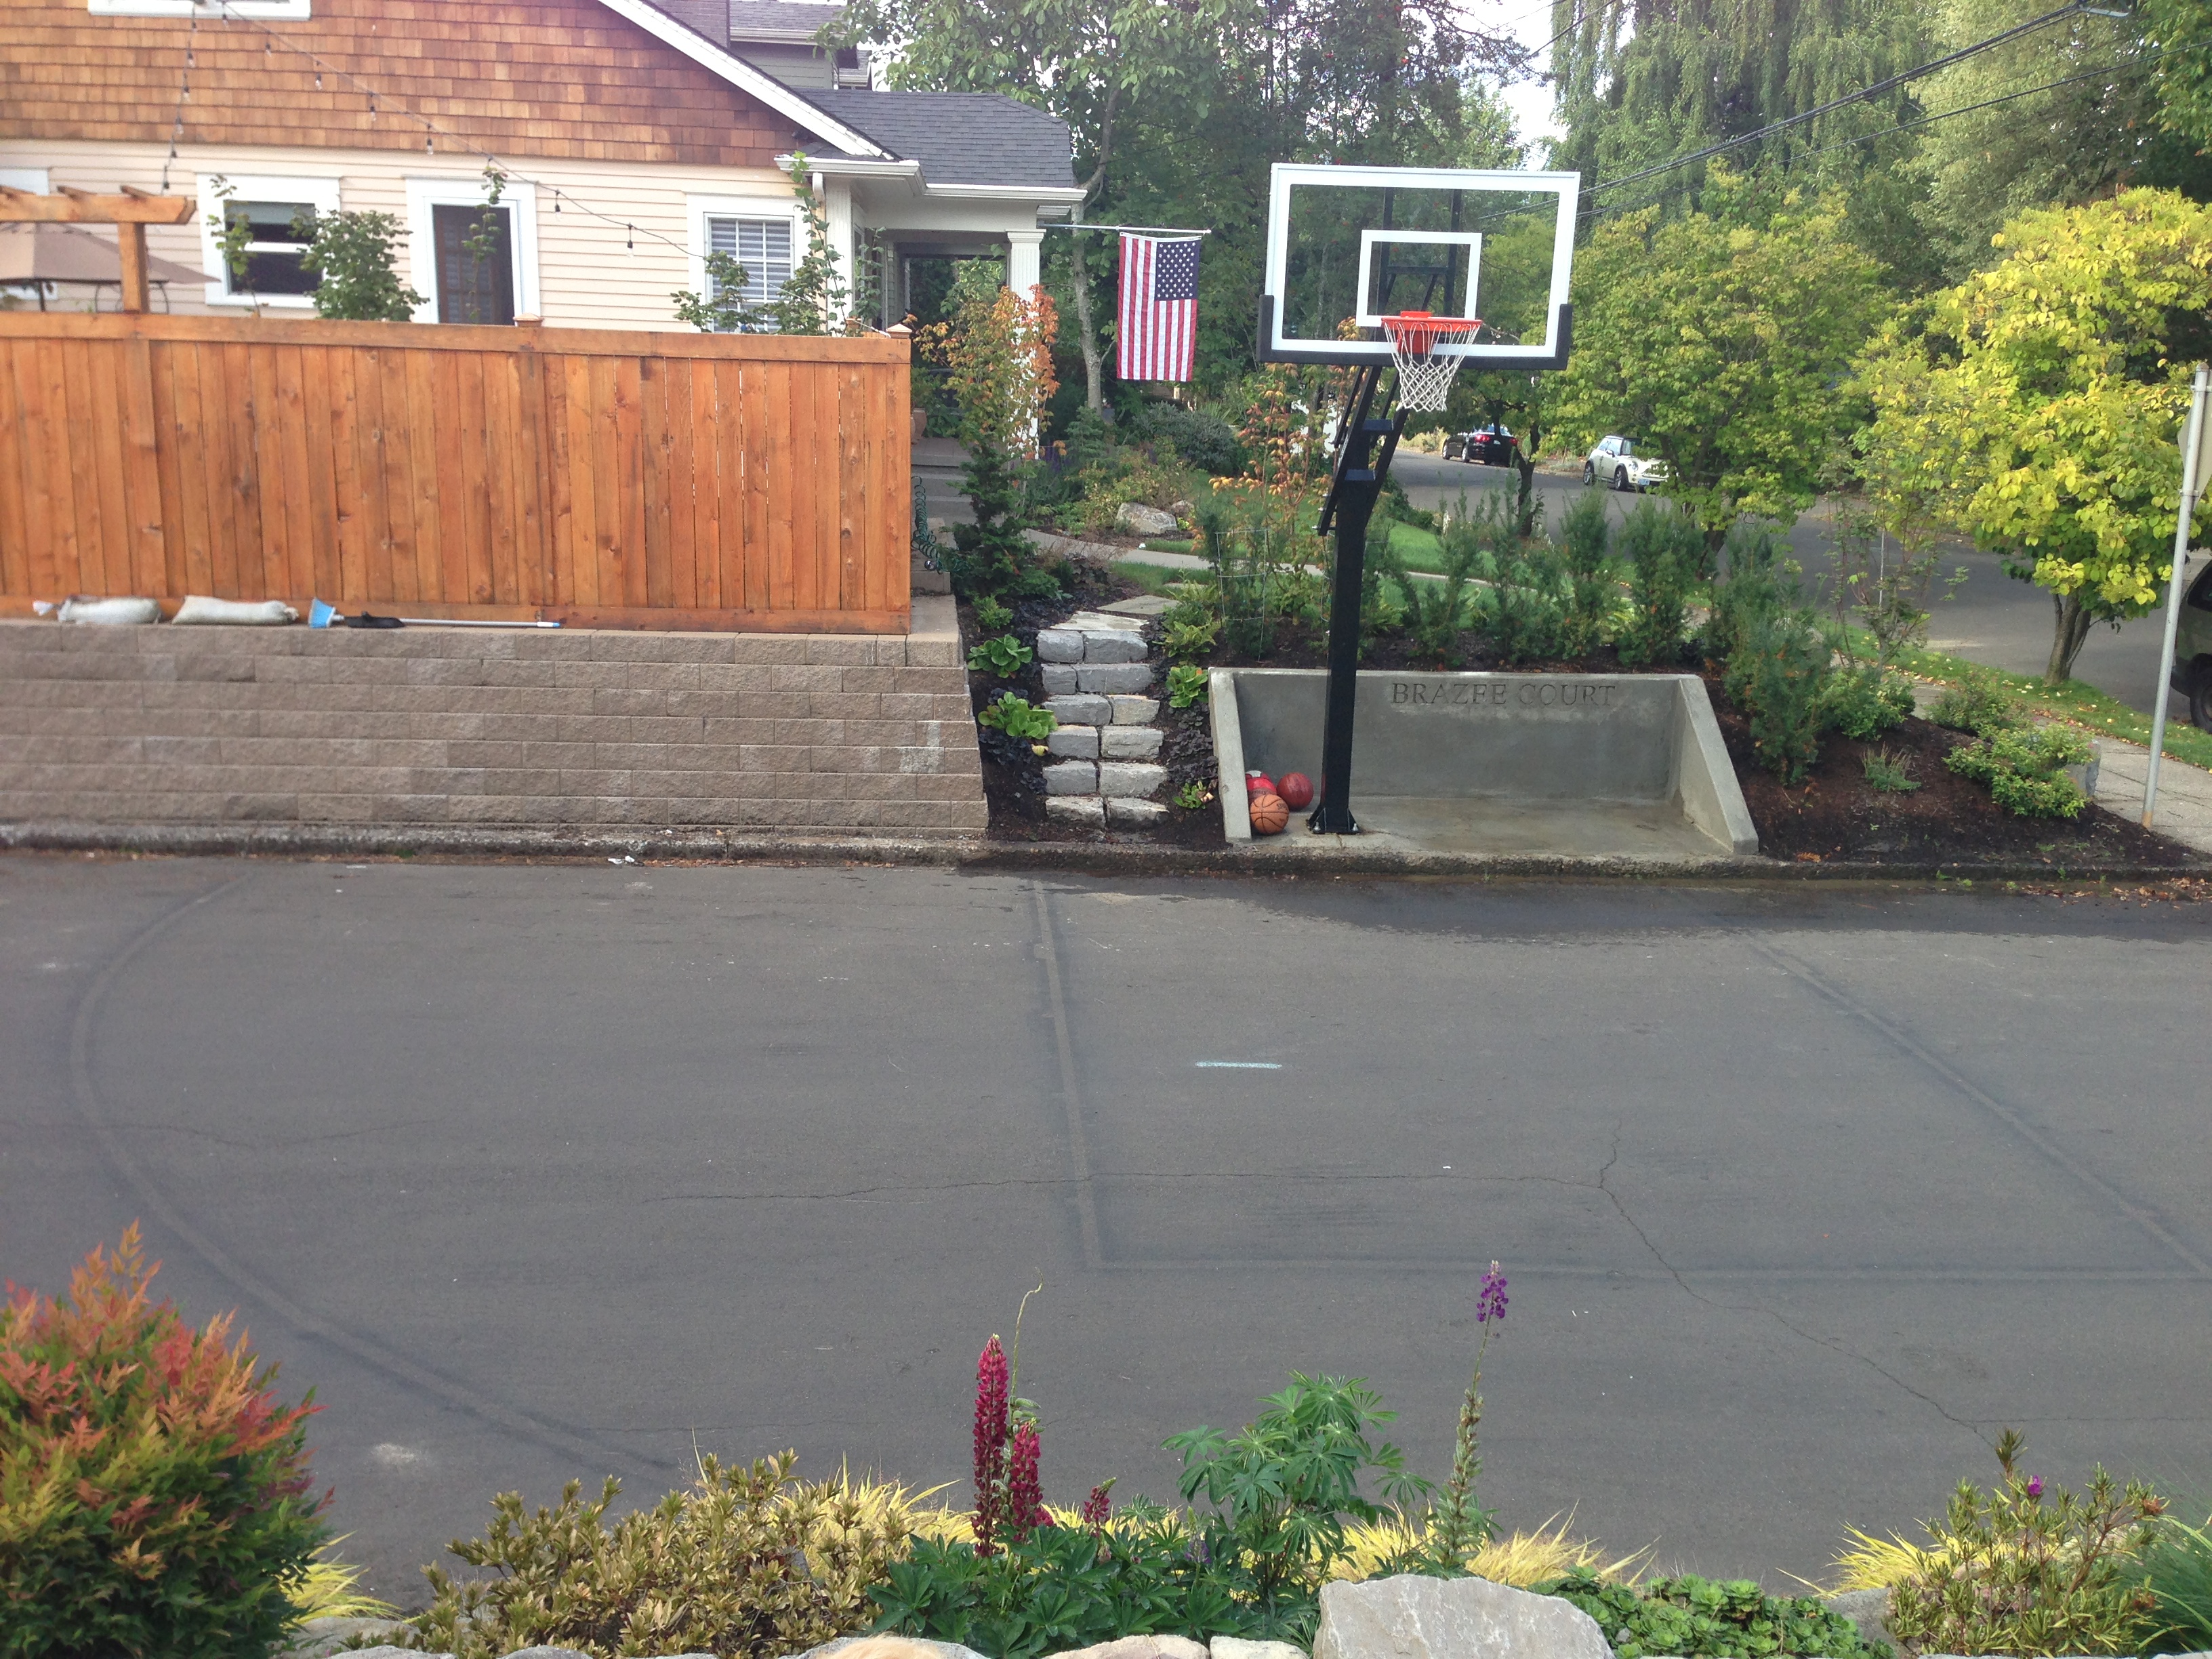 Half court right out the door in the front yard.